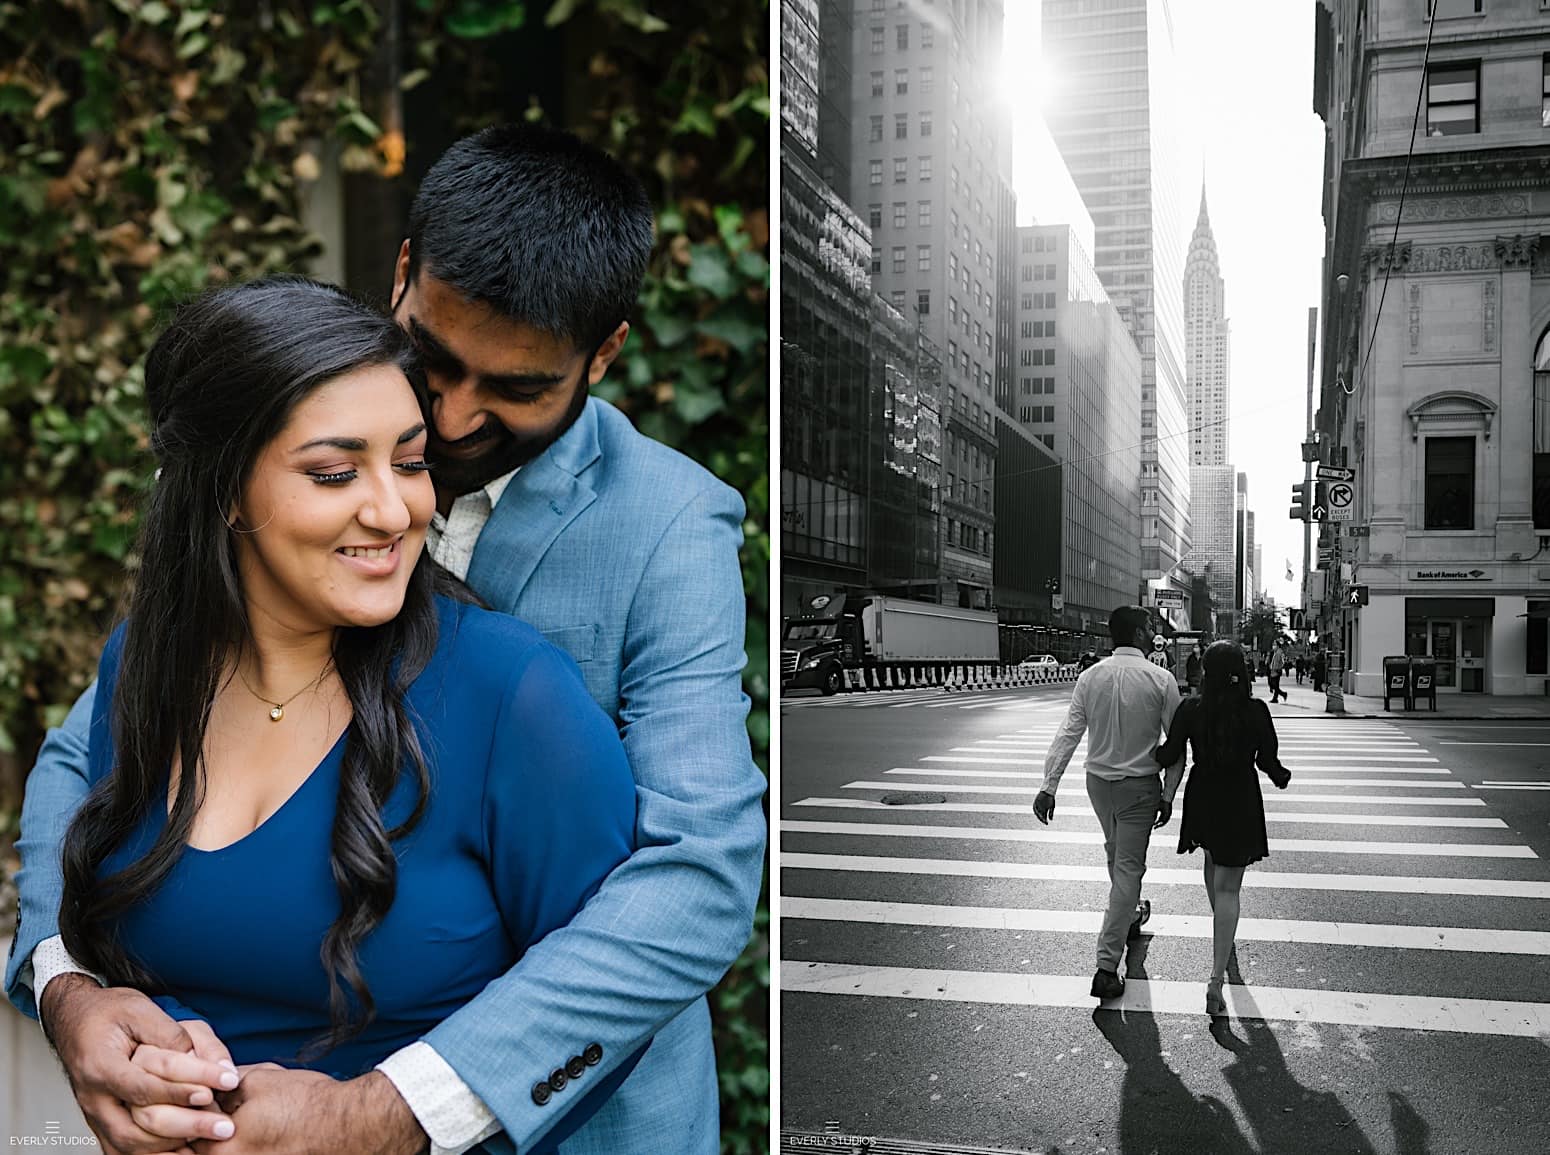 New York Public Library engagement photos in midtown Manhattan NYC